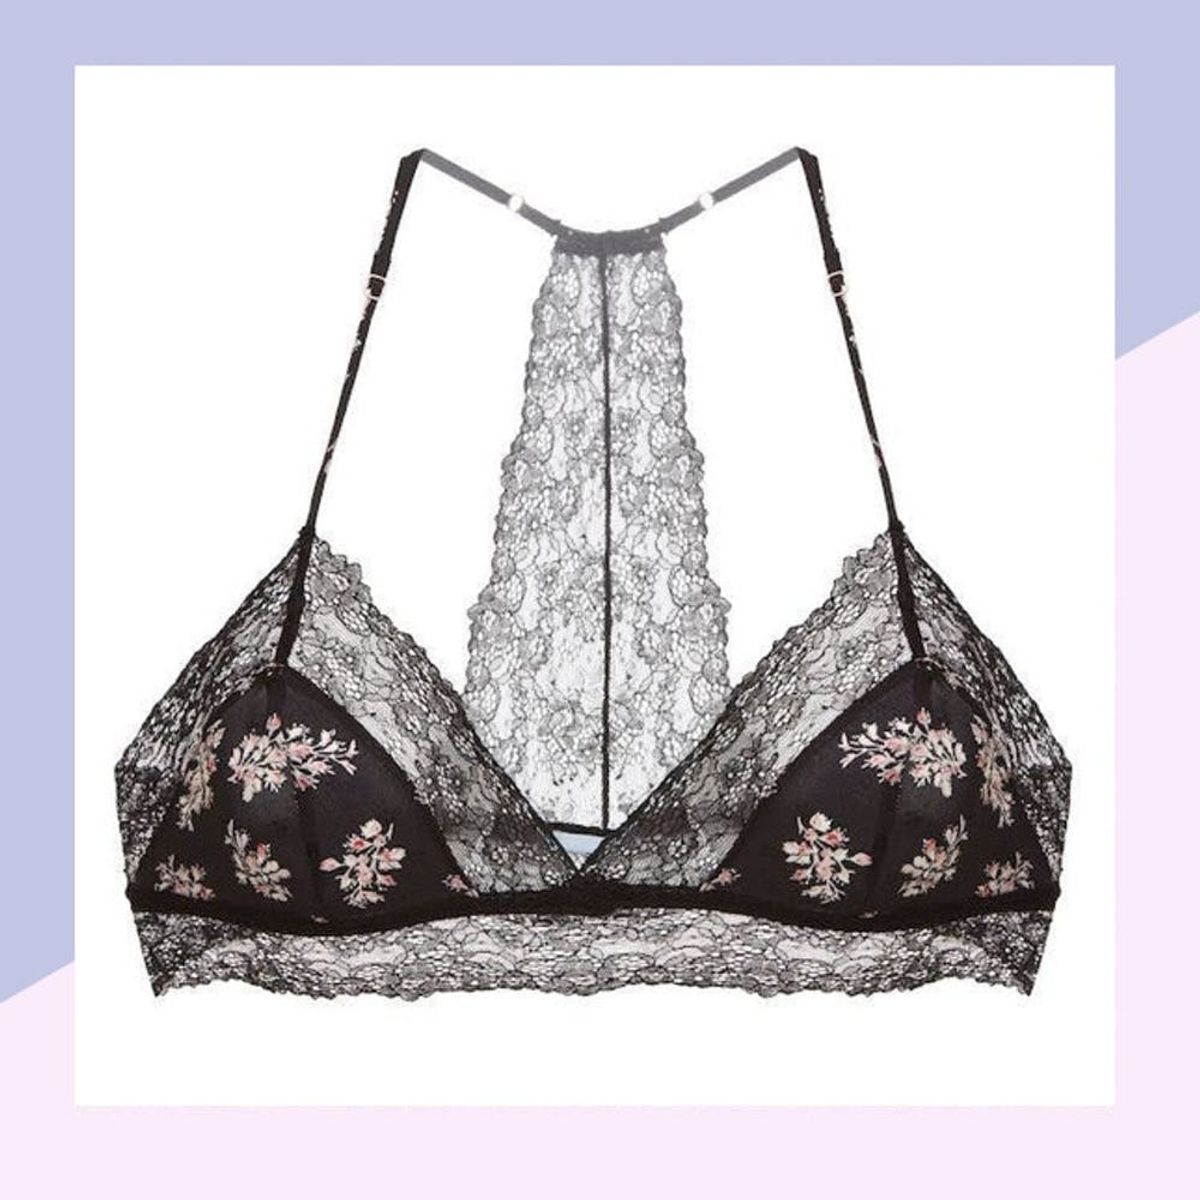 Rebecca Taylor x Eberjey Team Up for the Prettiest of Intimates Collections